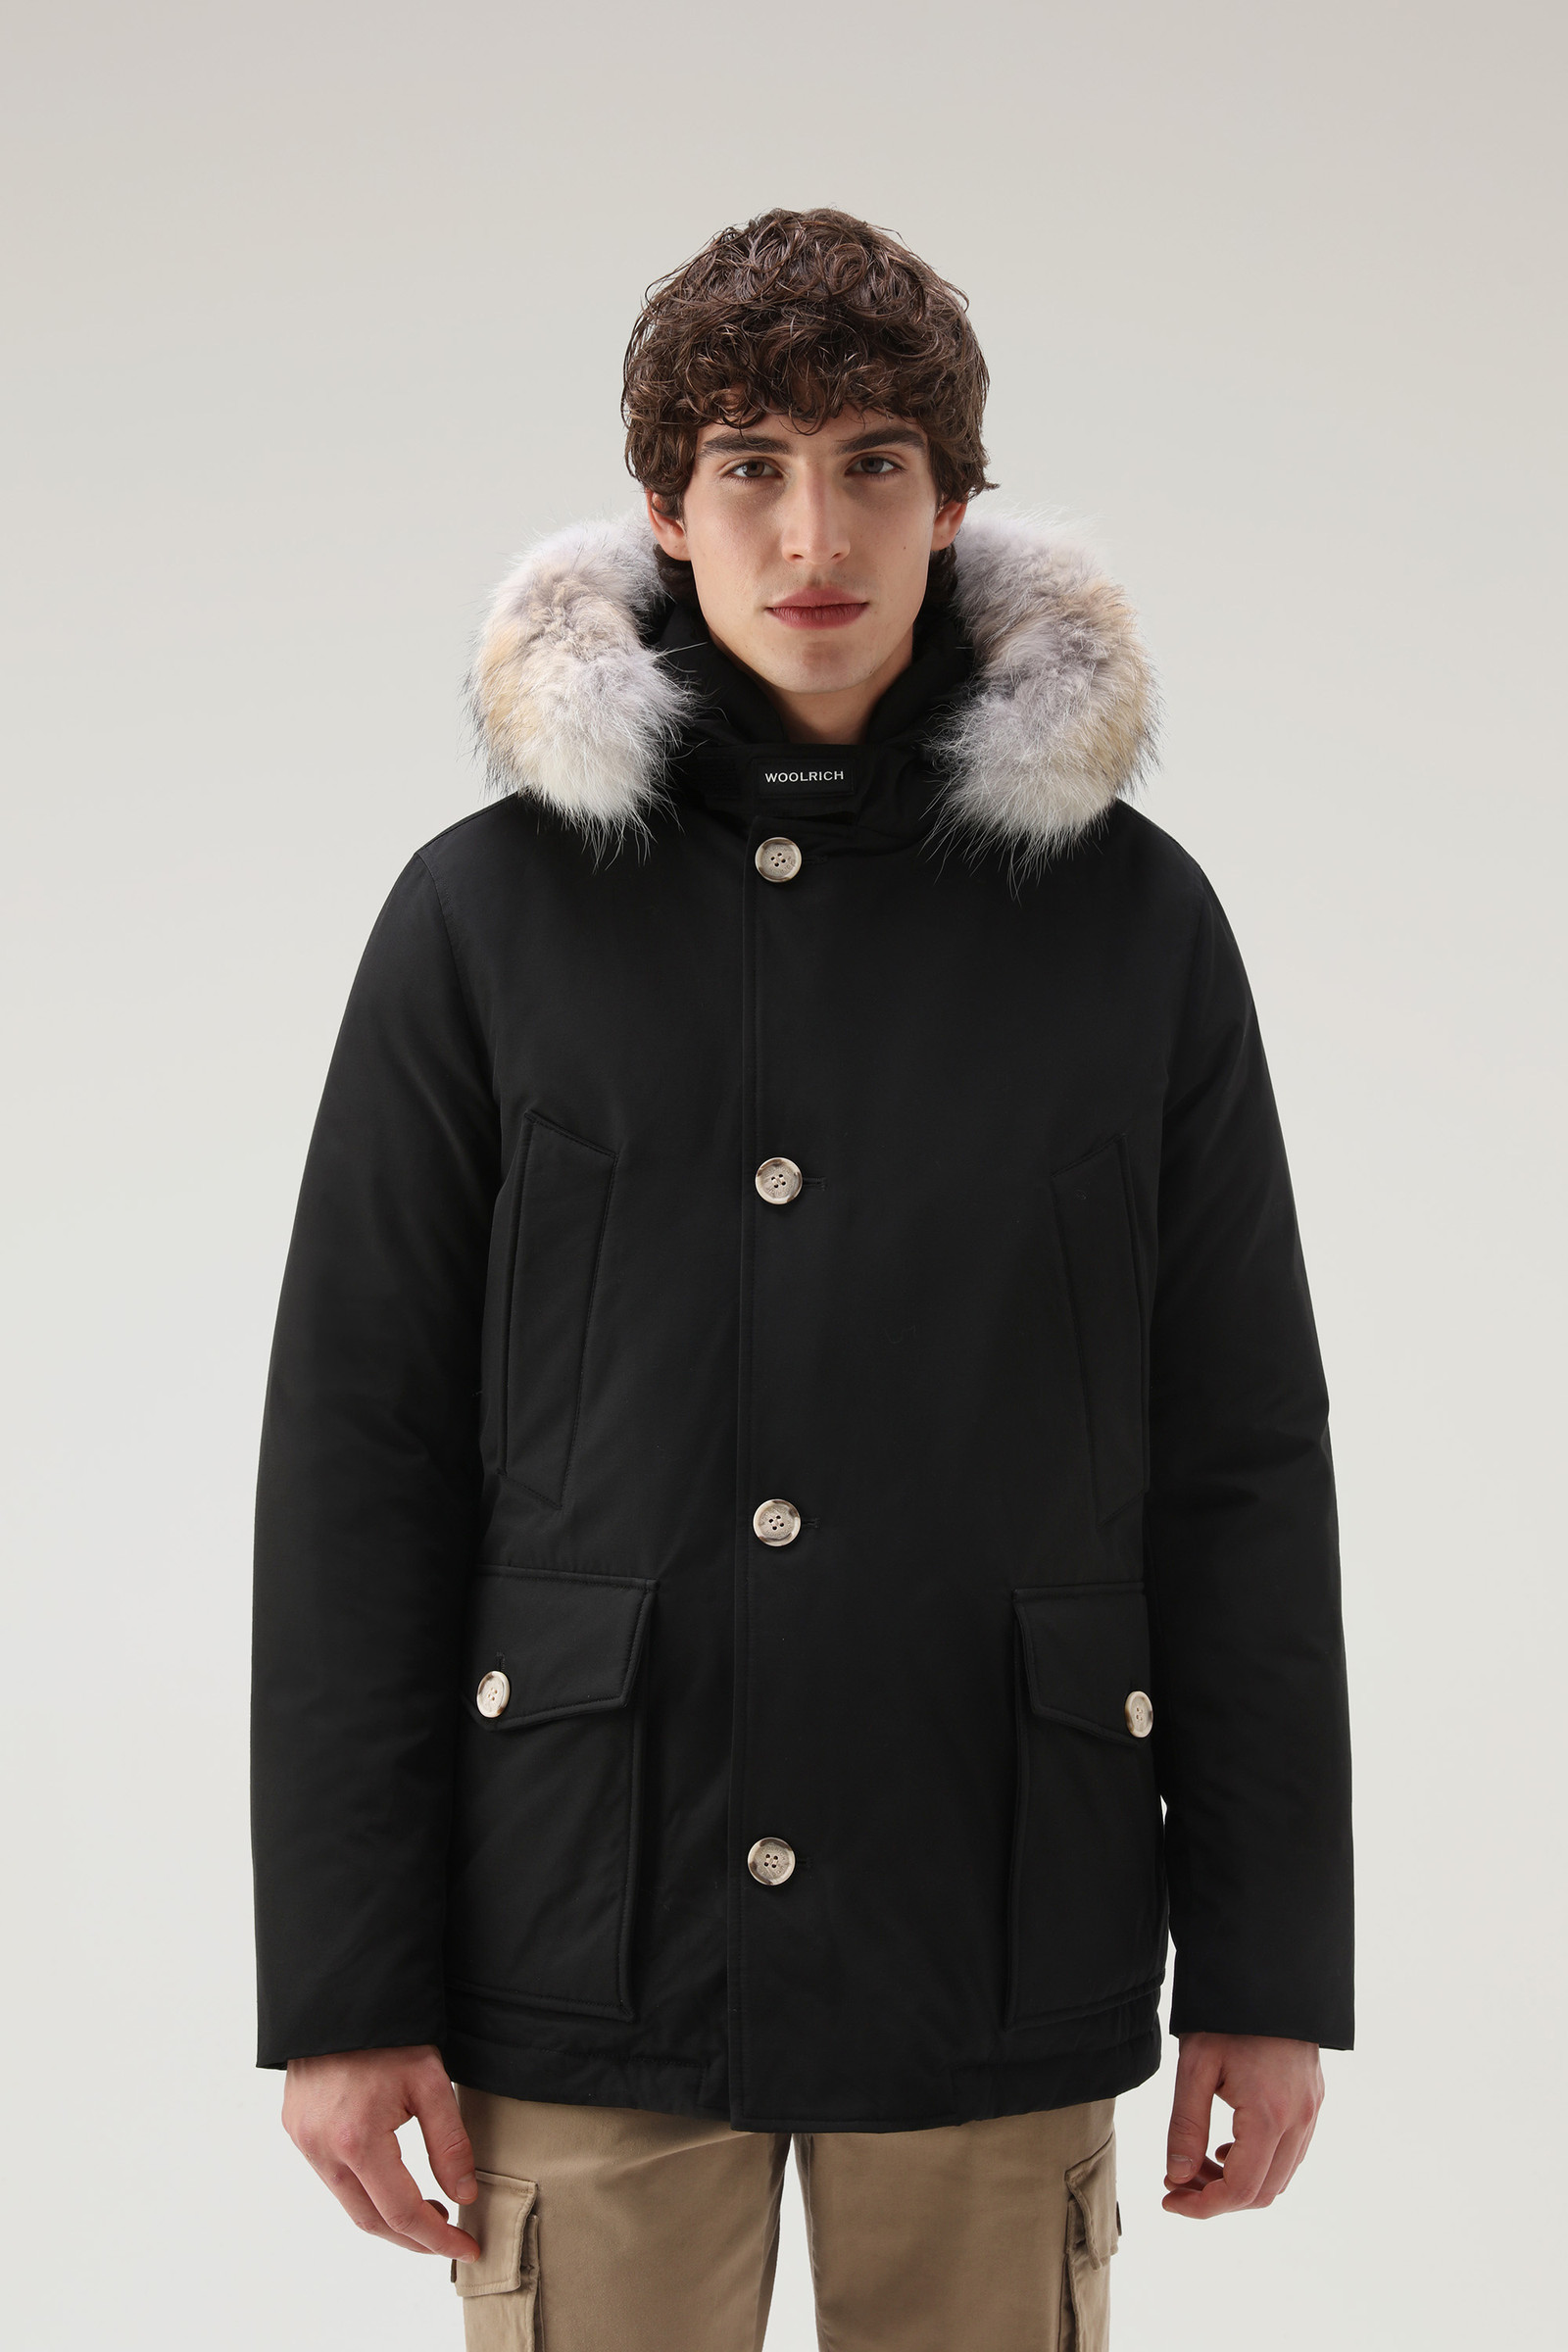 Men's Arctic Anorak in Ramar Cloth with Detachable Fur Black | Woolrich USA